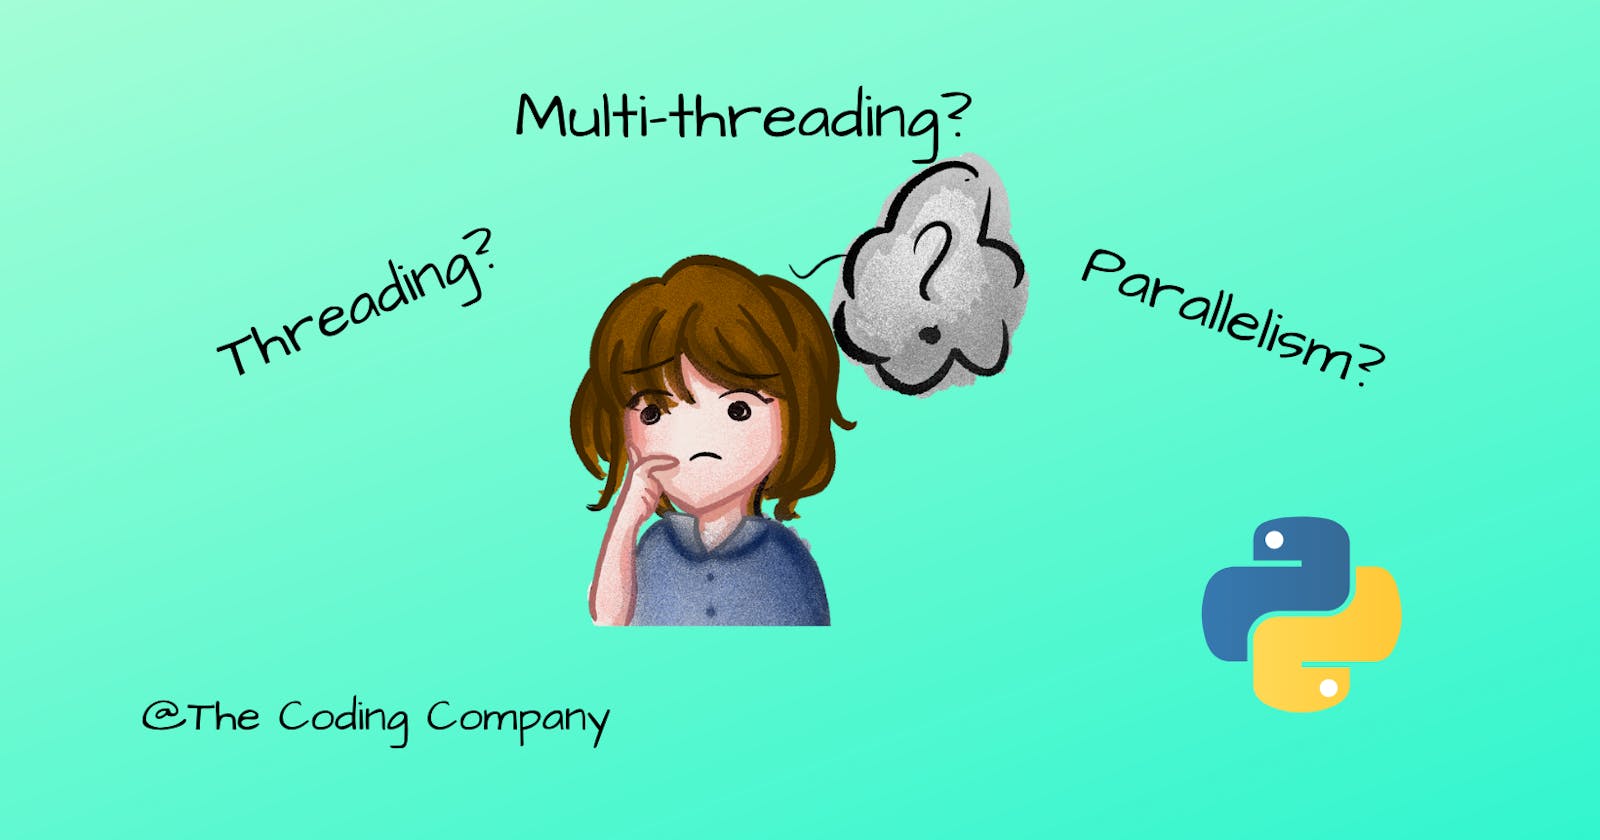 Everything you need to know about Parallelism, Threading, and Multi-threading in Python